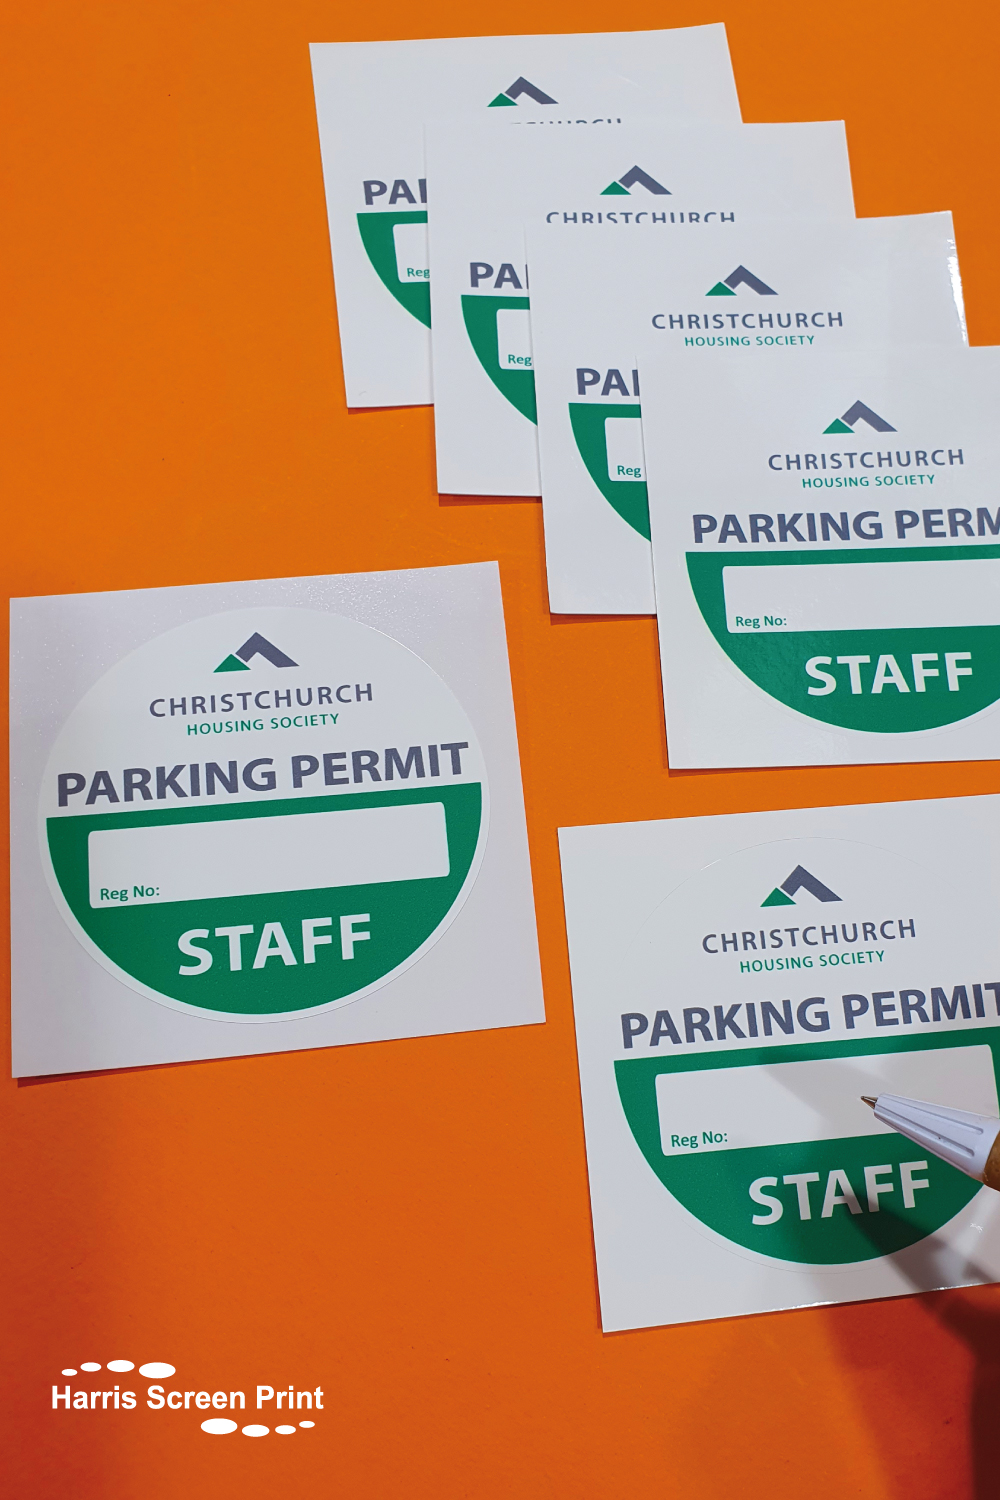 Staff parking permits printed for Christchurch Housing Society